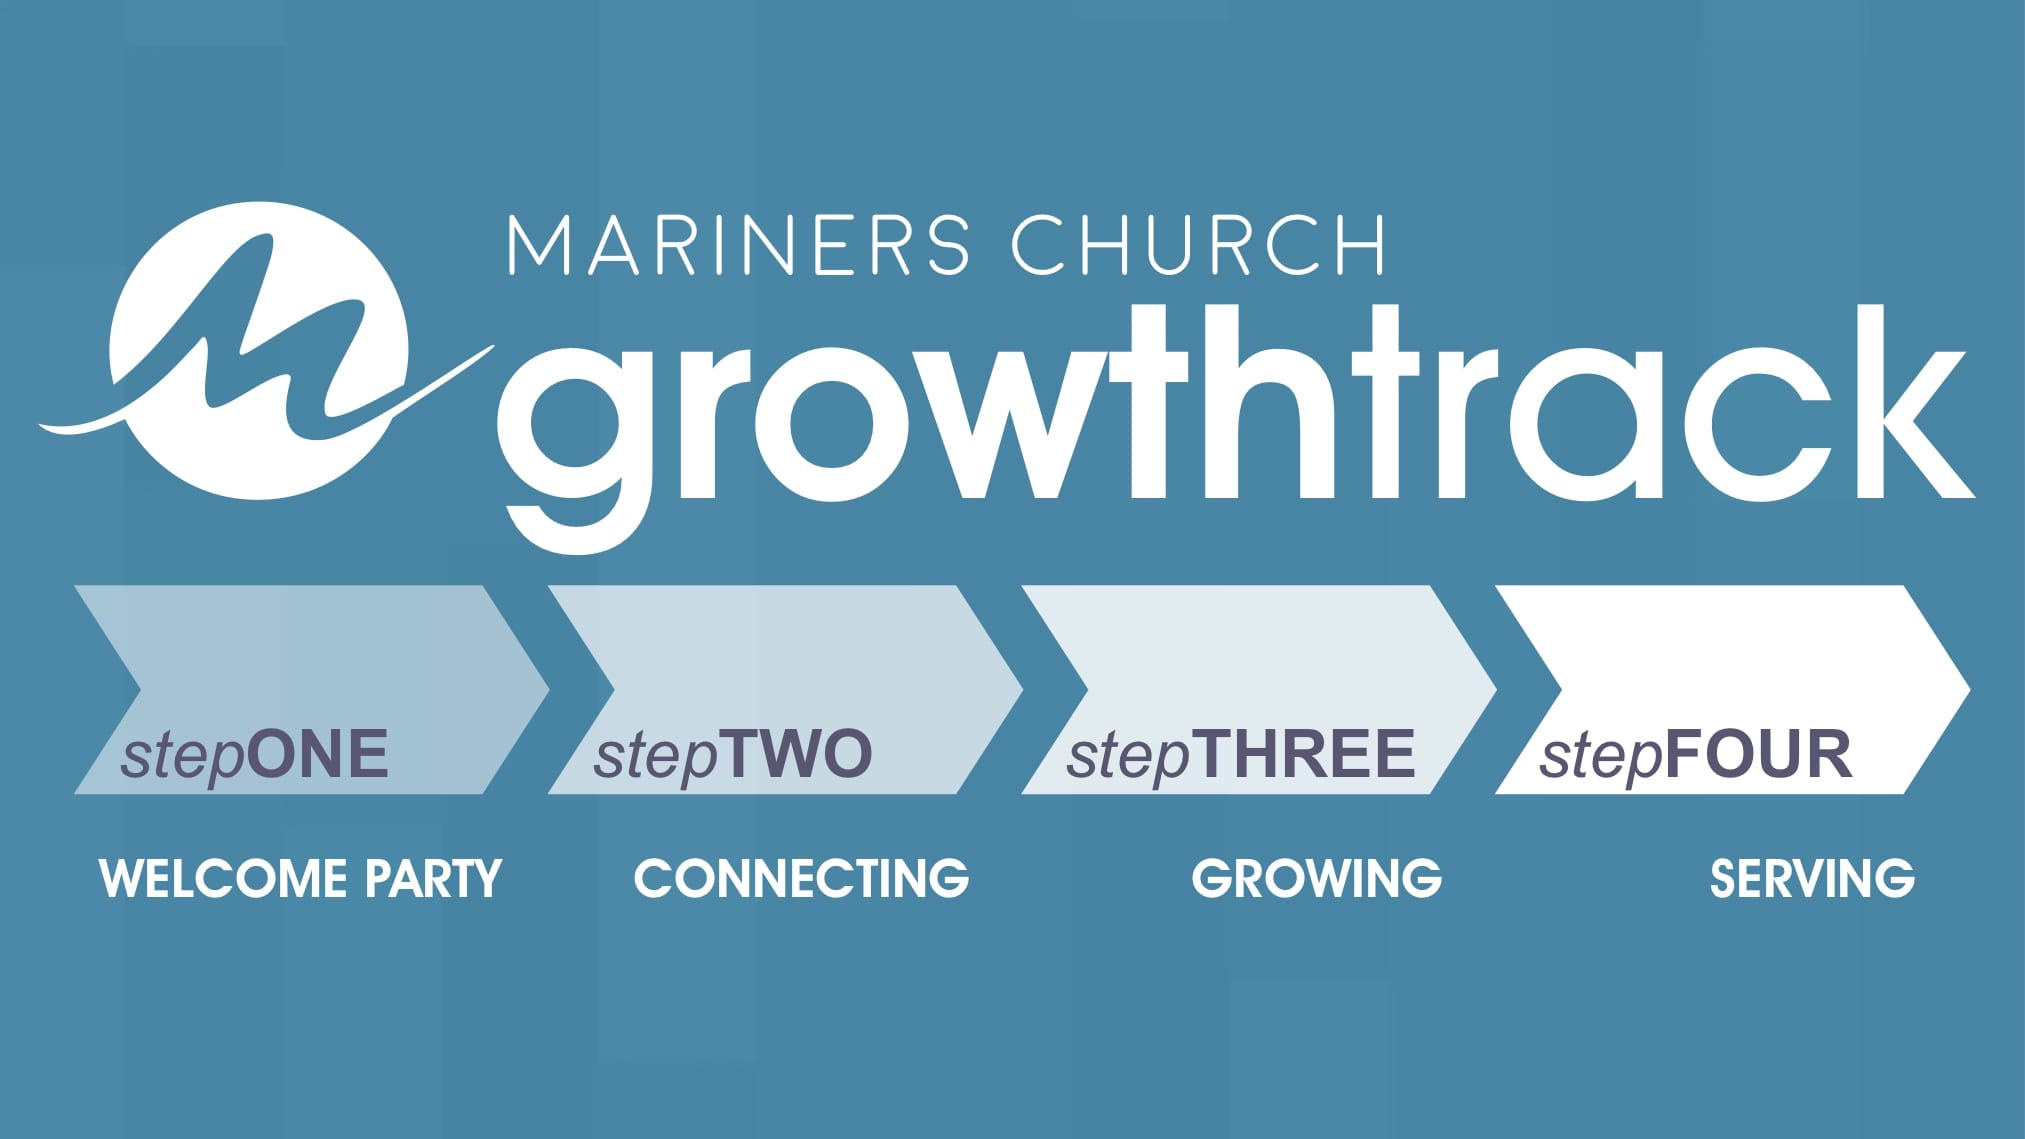 GrowthTrack, Your Next Step to Discover and Partner With YOUR Church